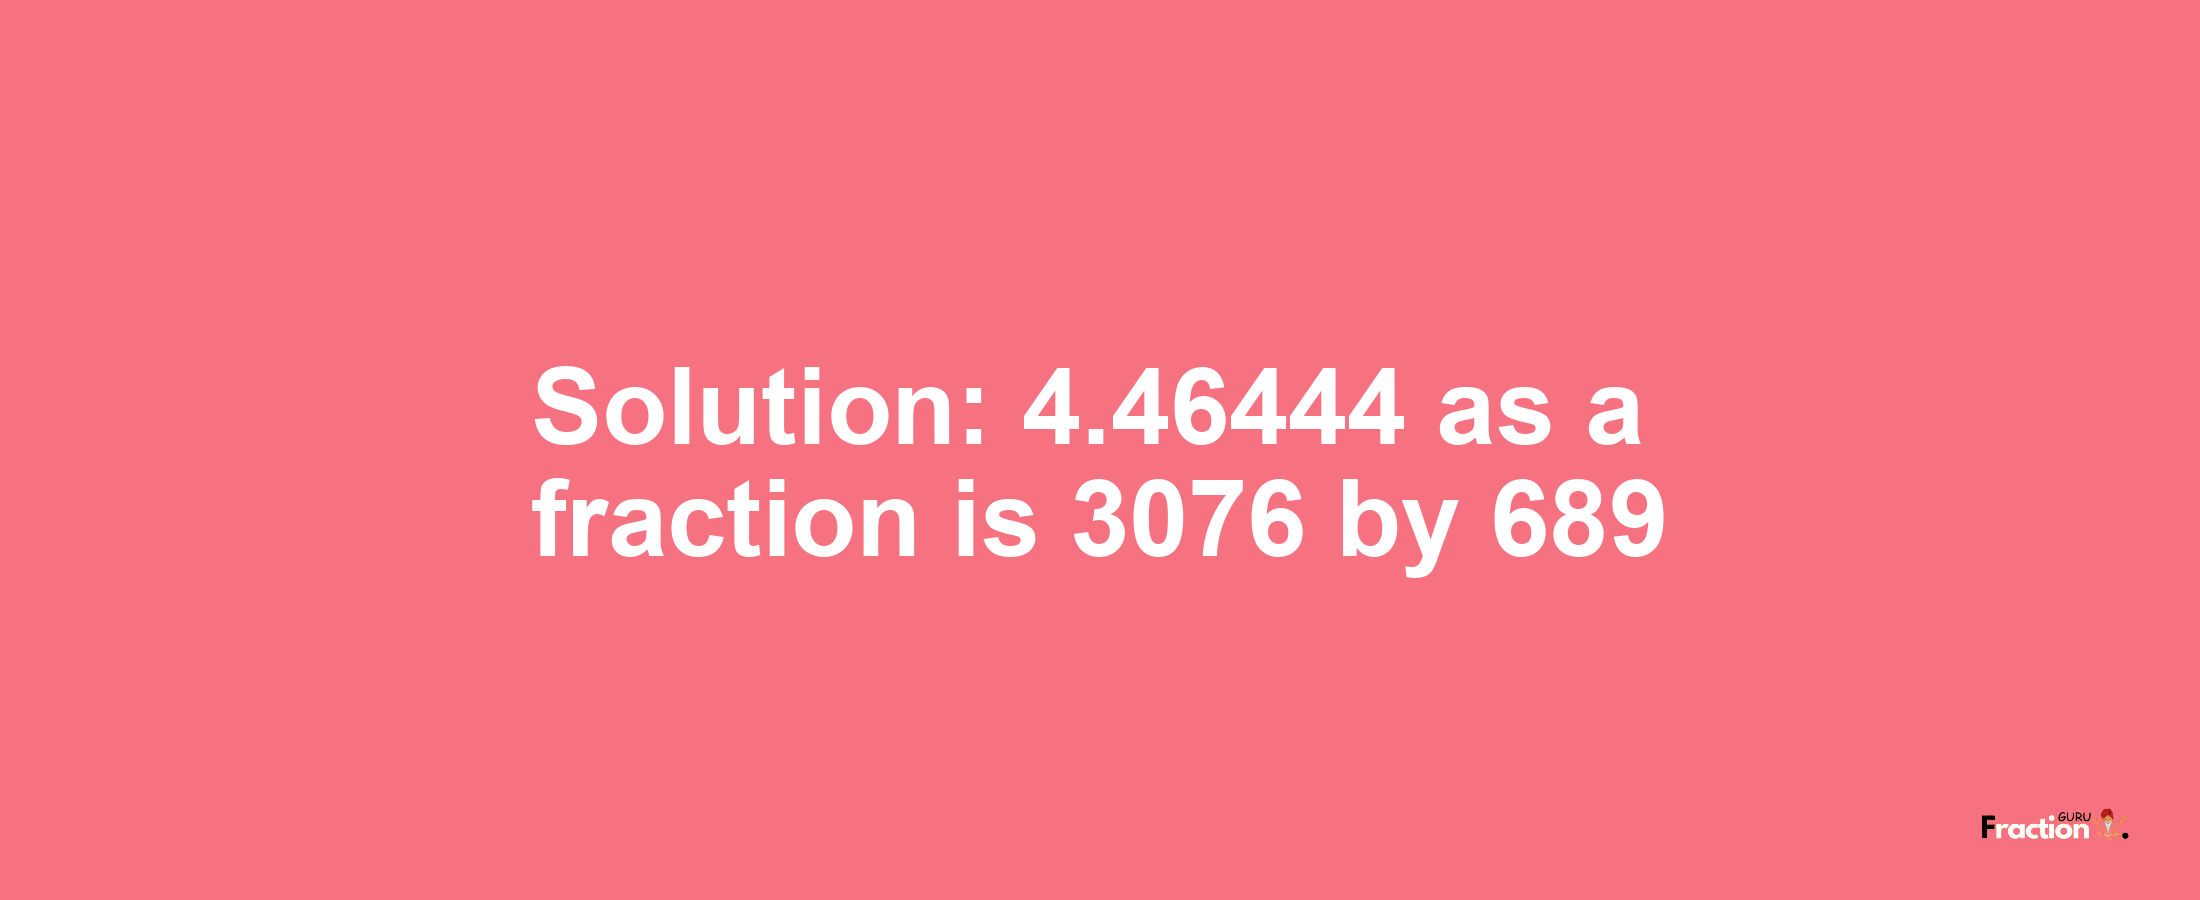 Solution:4.46444 as a fraction is 3076/689